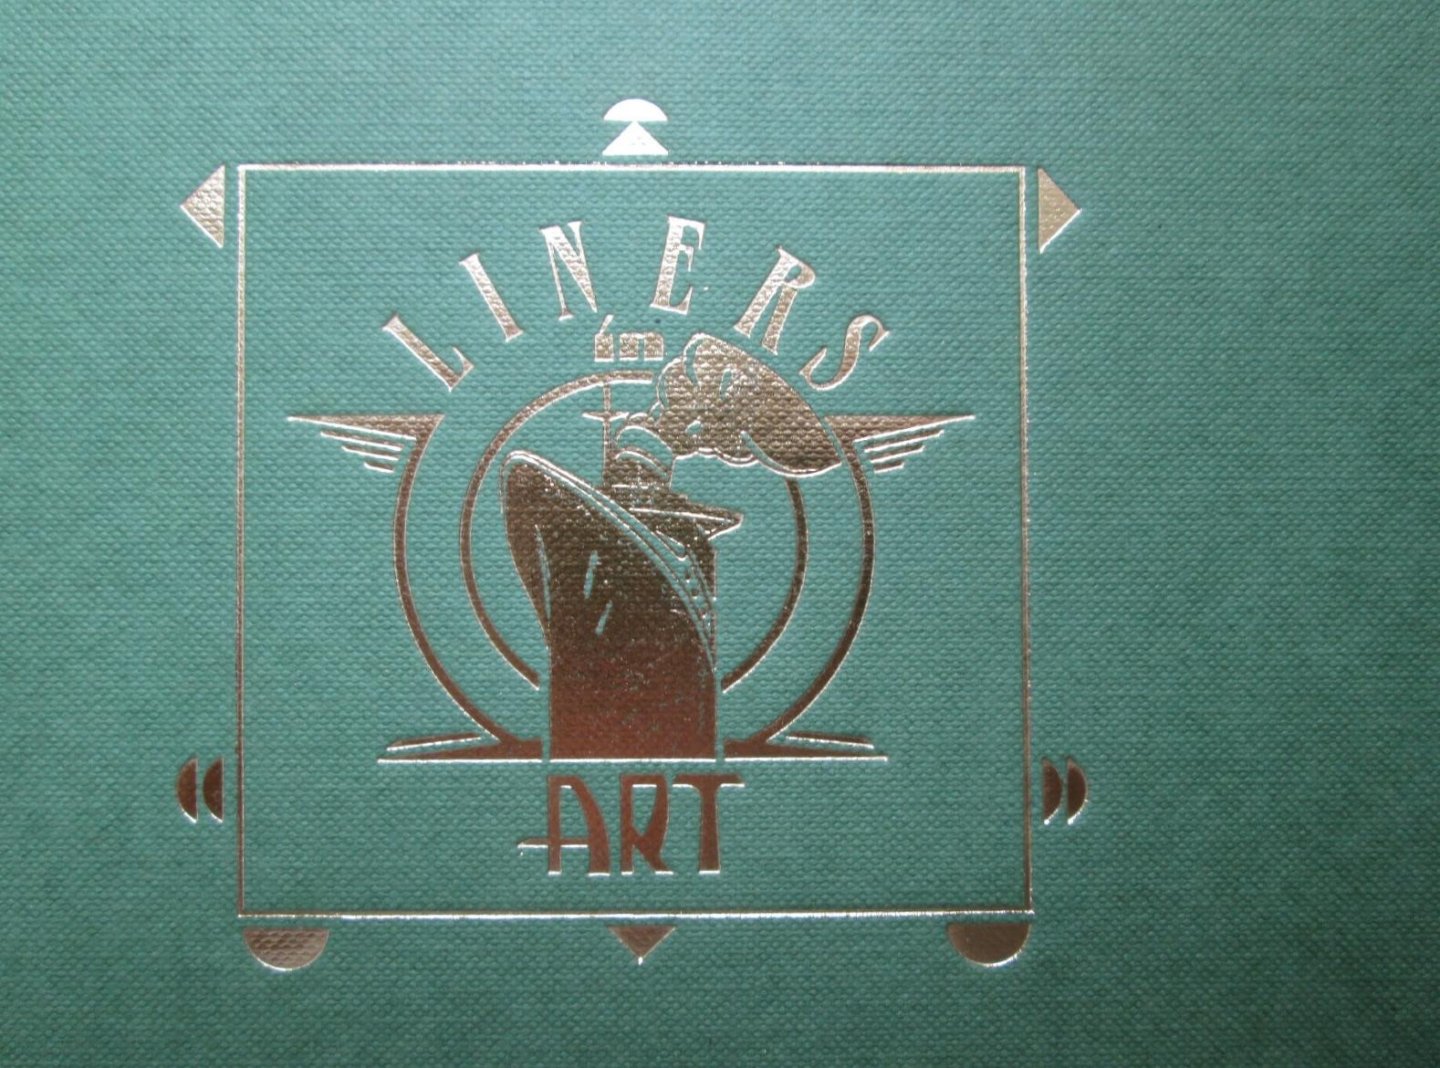 Kenneth Vard - Liners in Art